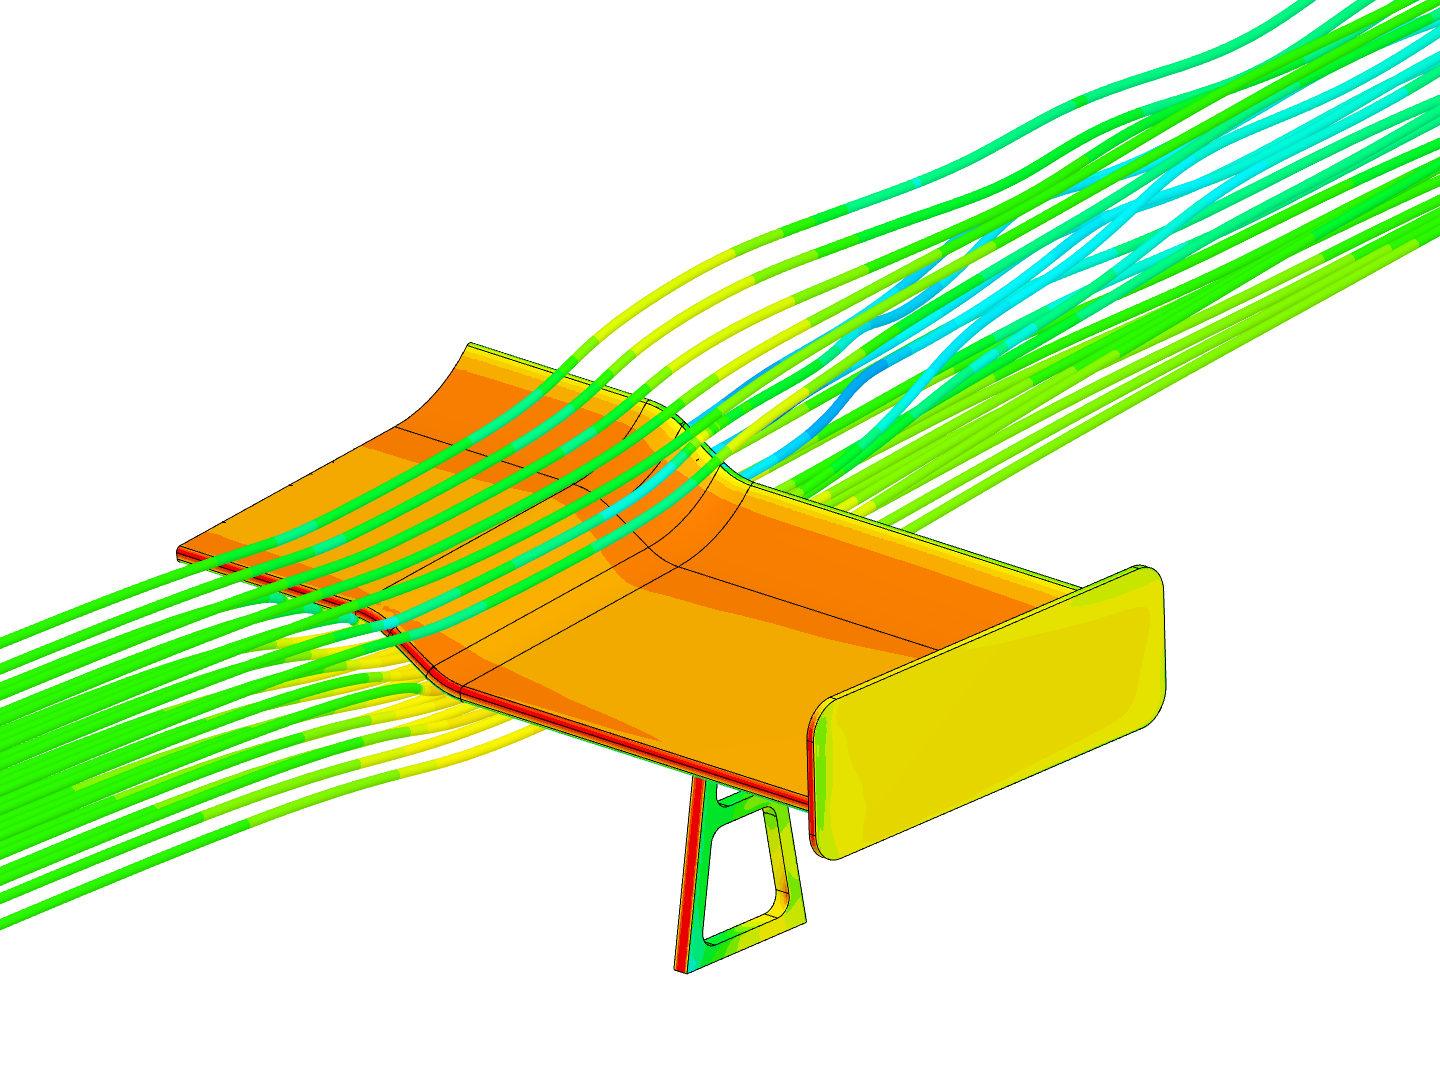 Coursera - Airflow around a GT Car Spoiler (guided project) image